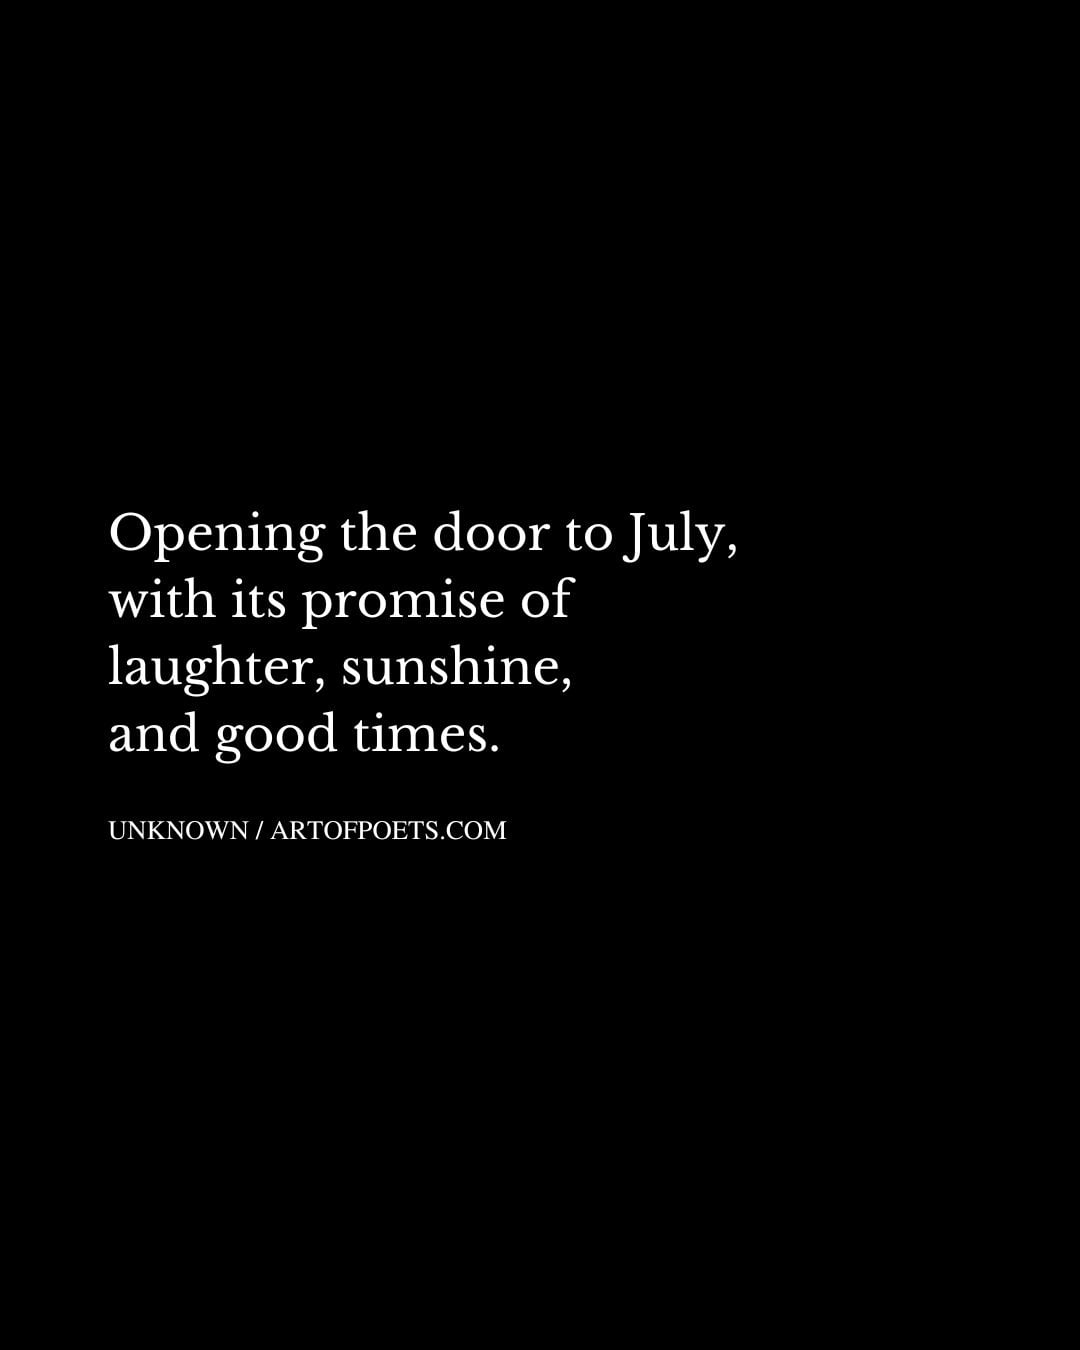 Opening the door to July with its promise of laughter sunshine and good times